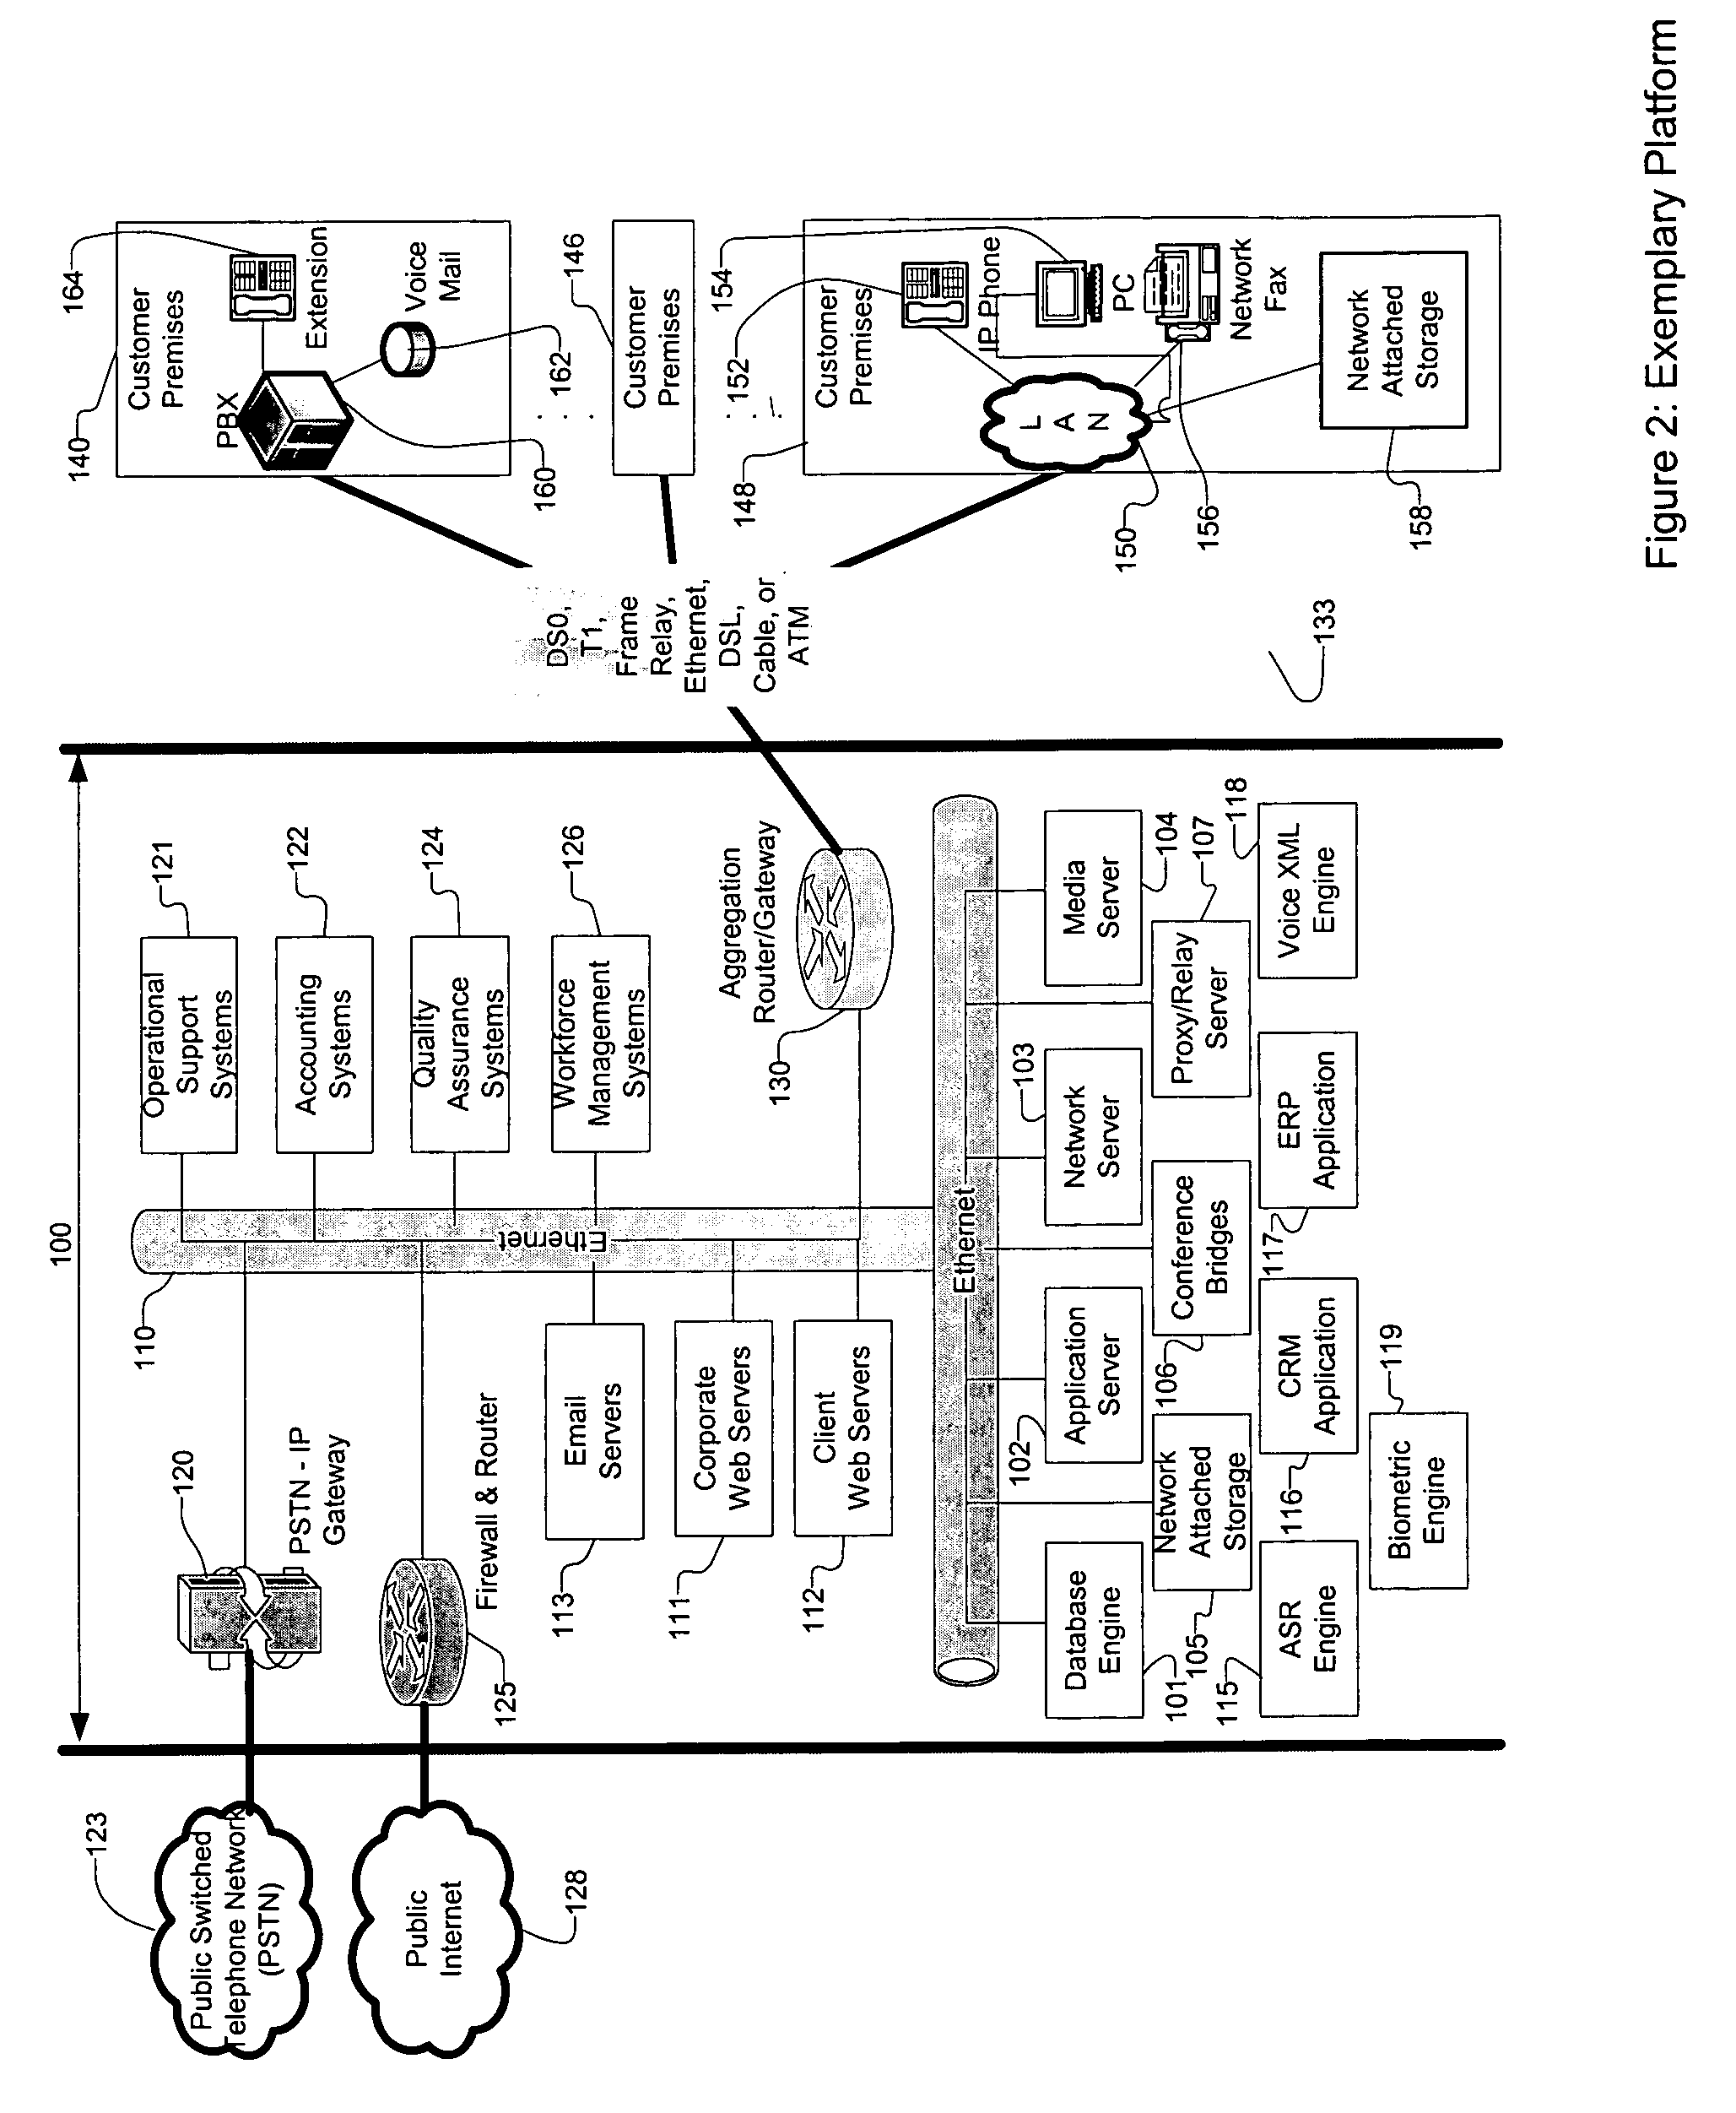 System and method for the secure, real-time, high accuracy conversion of general-quality speech into text